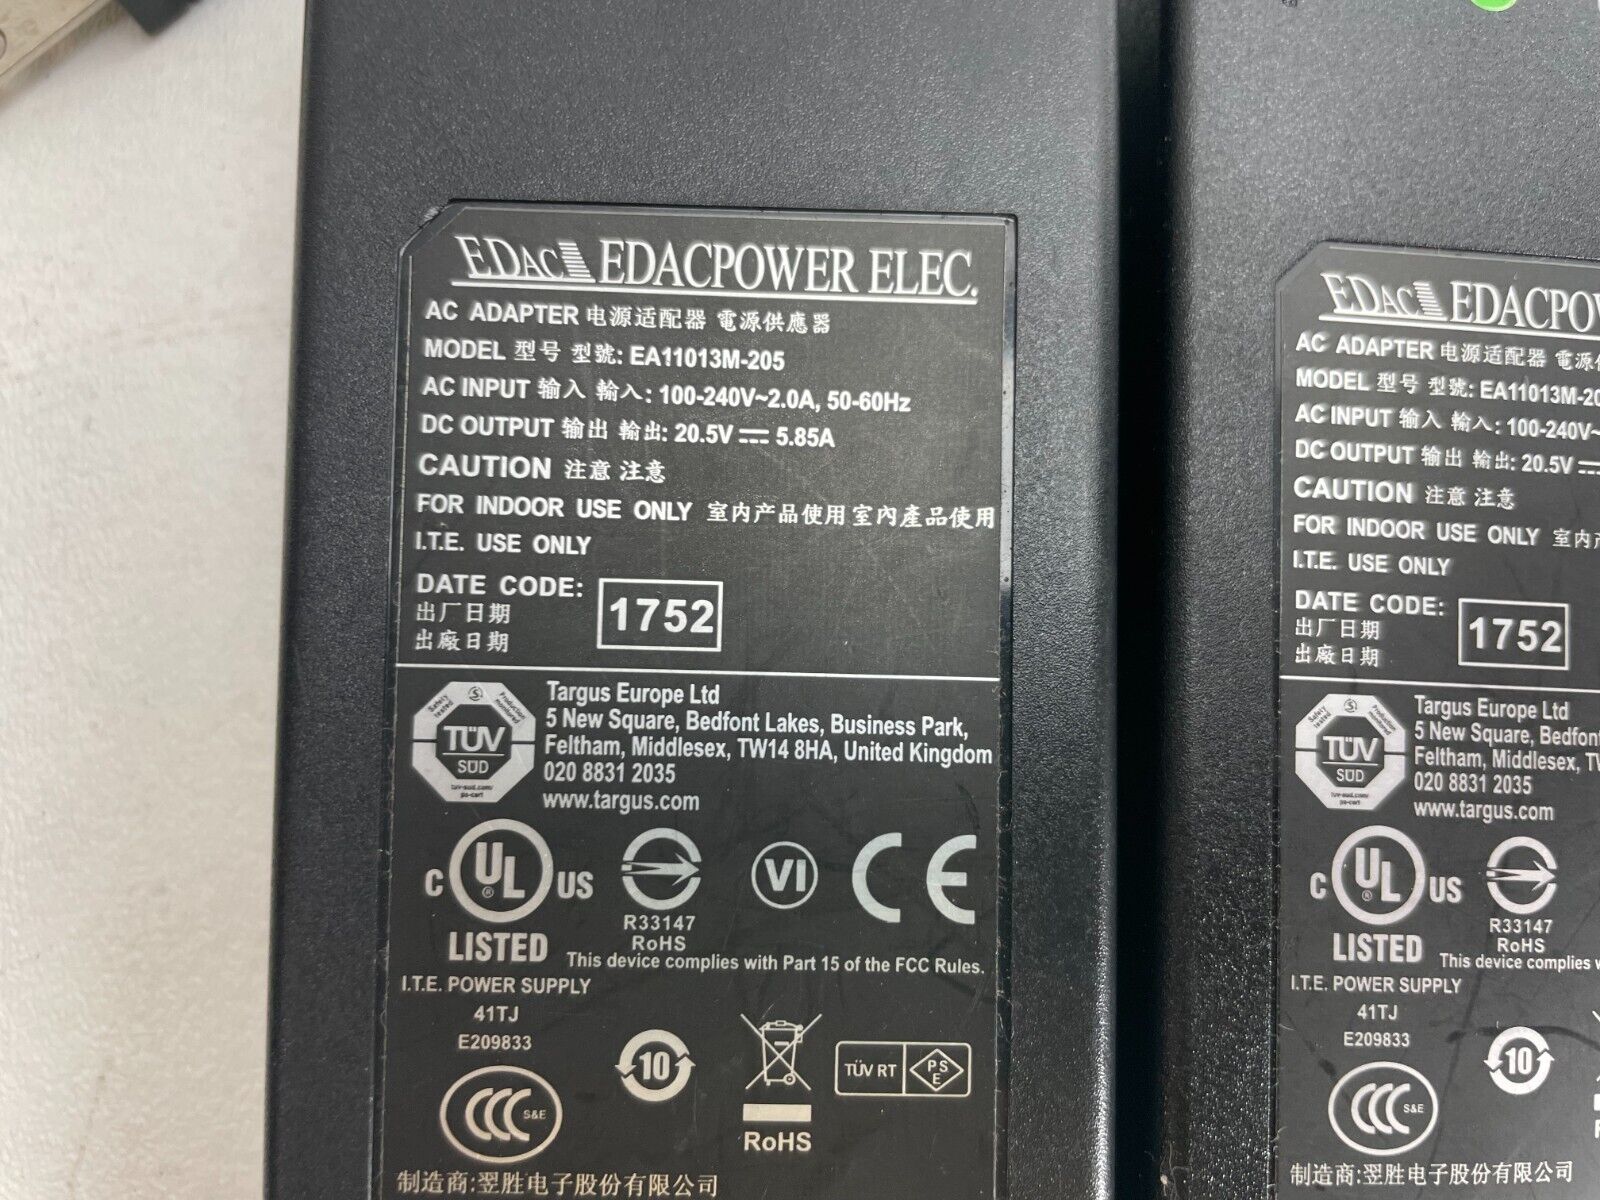 EDAC Power AC Adapter EA11013M-205 input 100-240V output 20.5V-5.85A Brand Edac Type Adapter Color Black Features Power